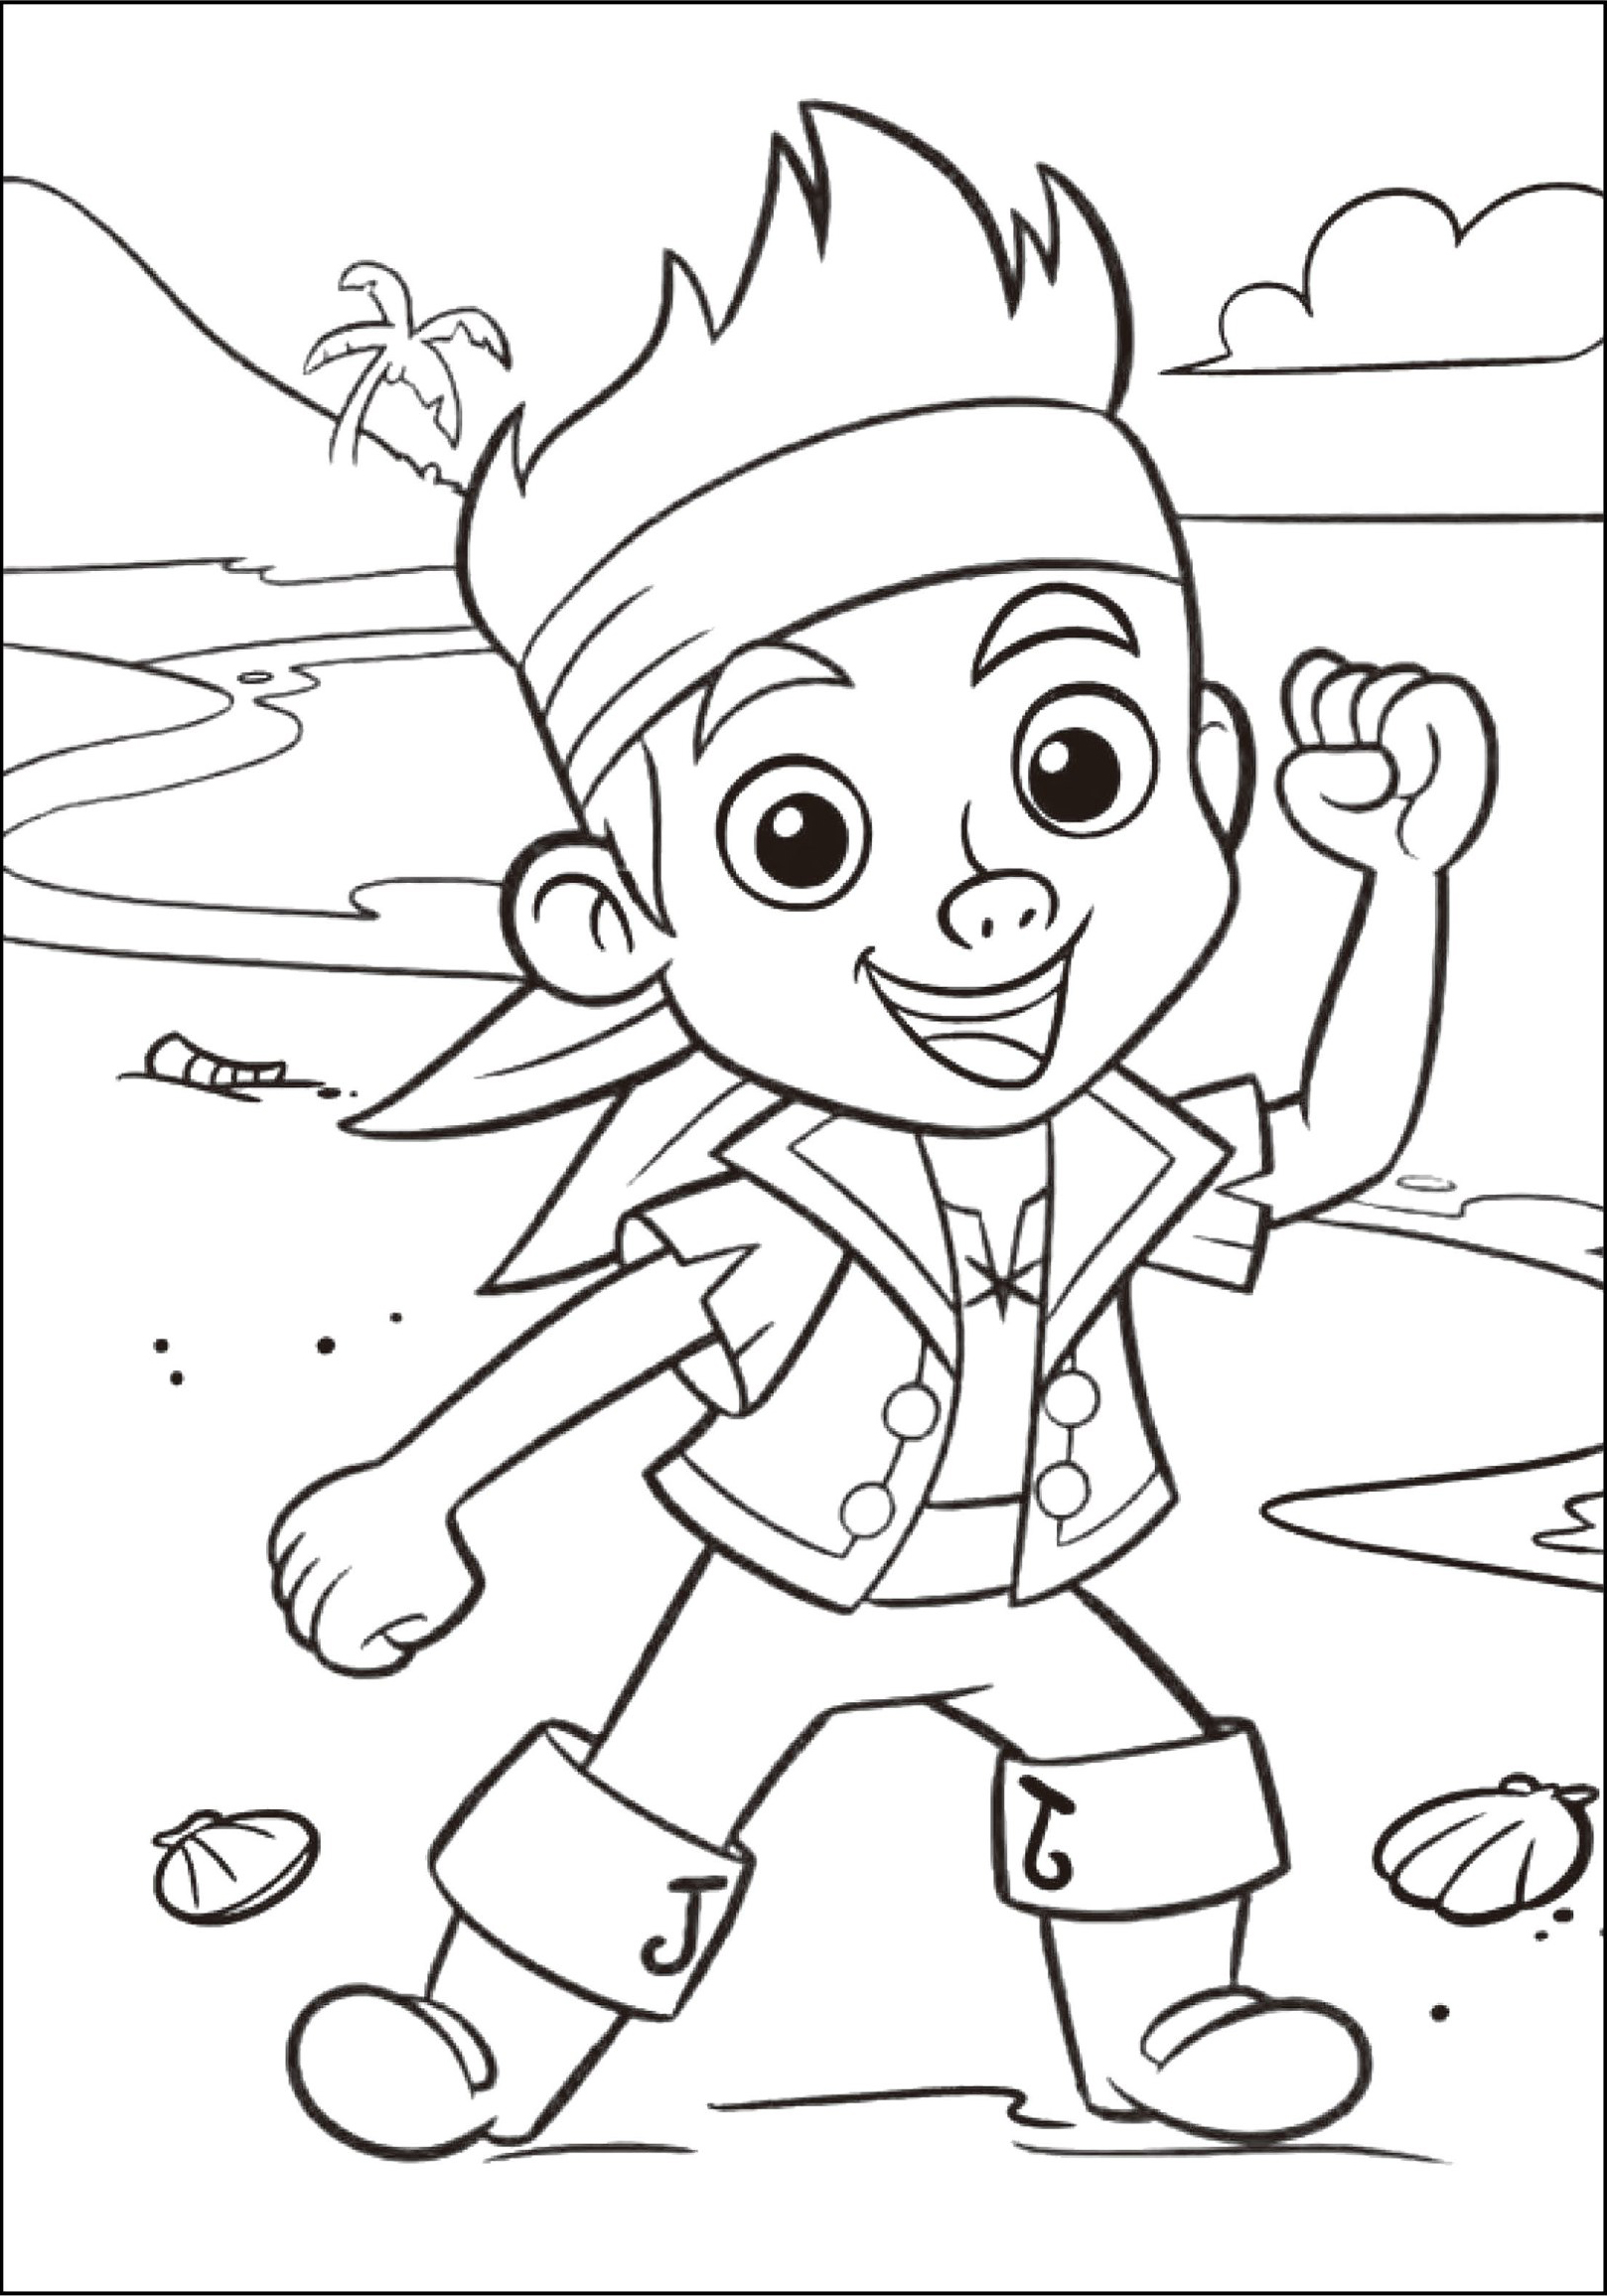 Coloring page Jake and the Never Land Pirates Pirate Jack